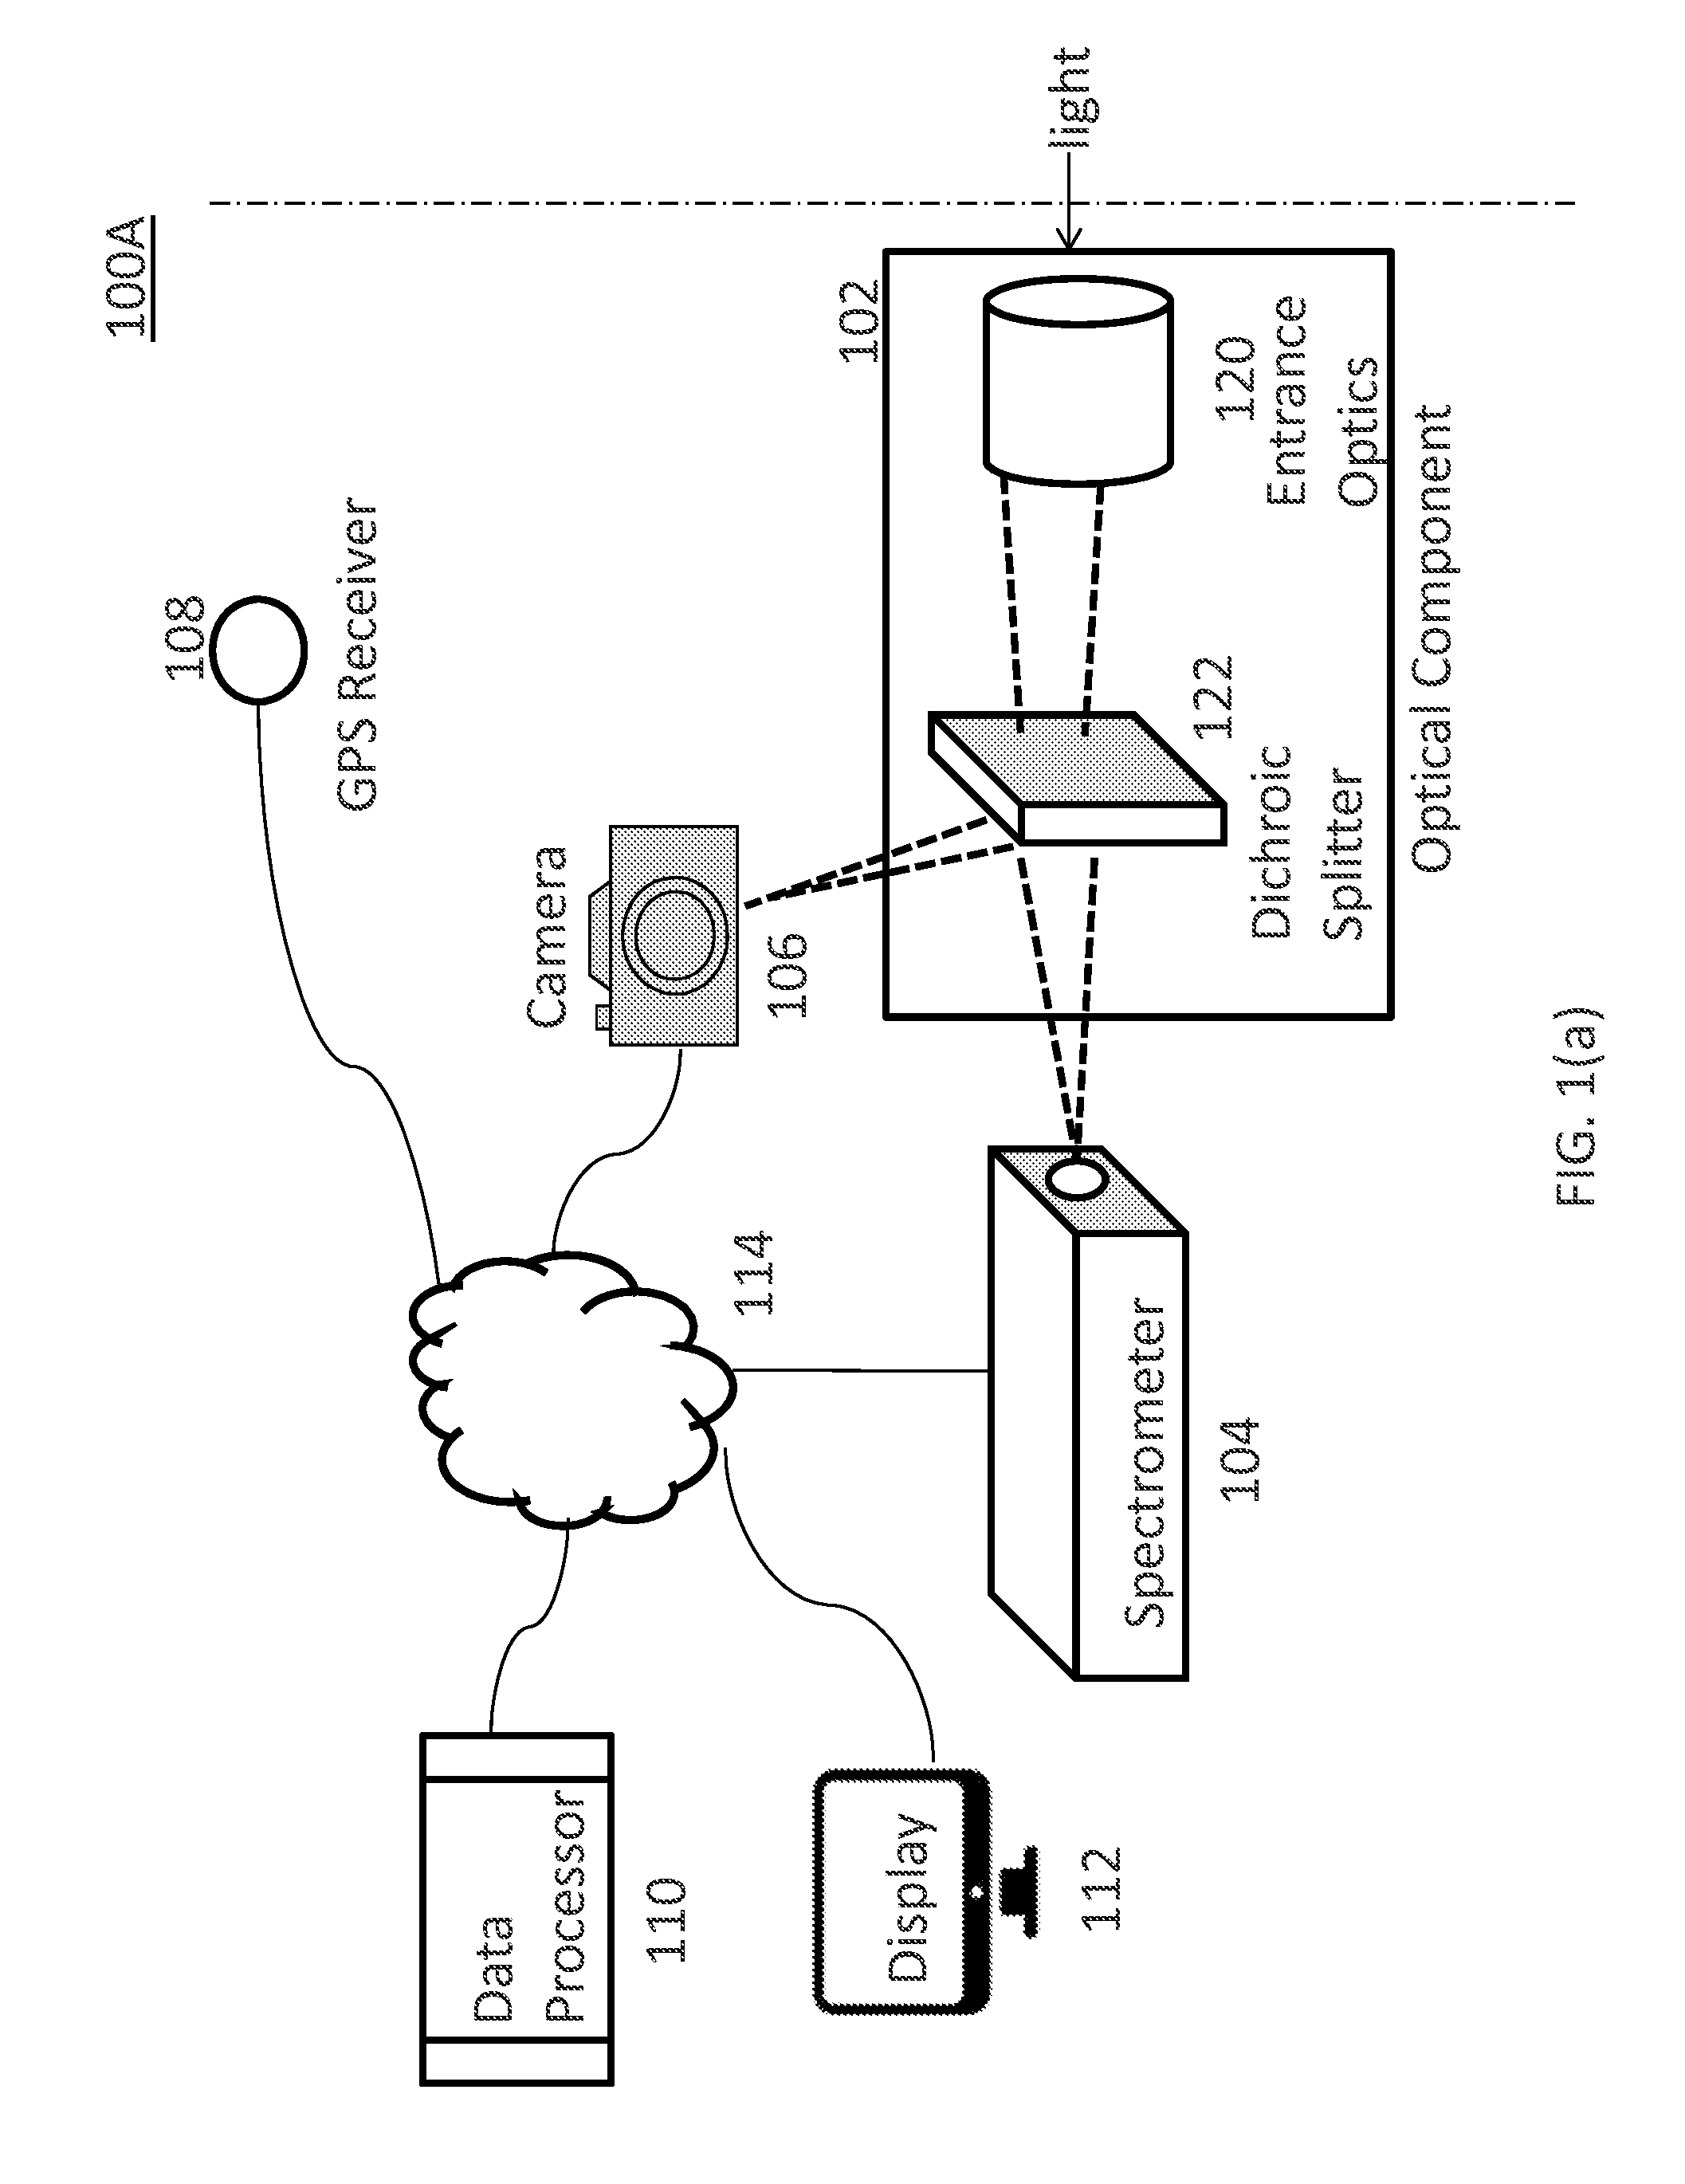 Systems and methods for detecting gas leaks